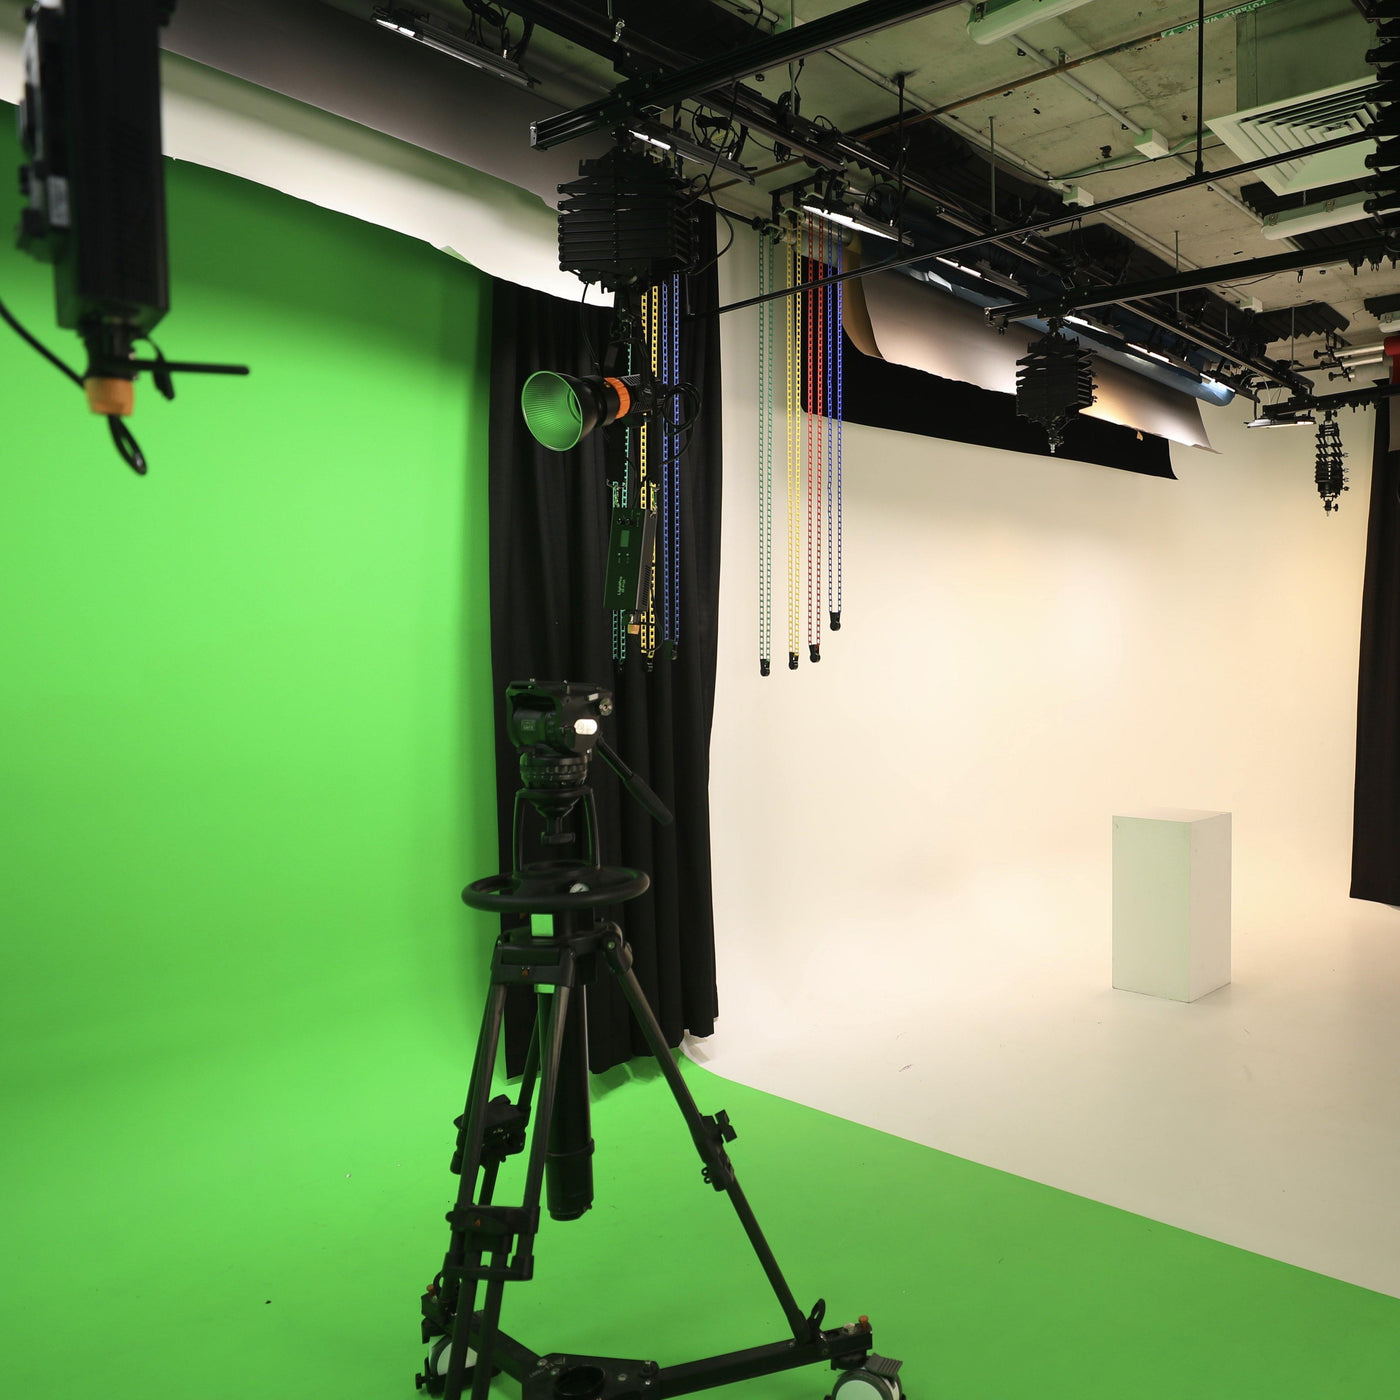 About the Studio We Built for William Clarke College - Dragon Image